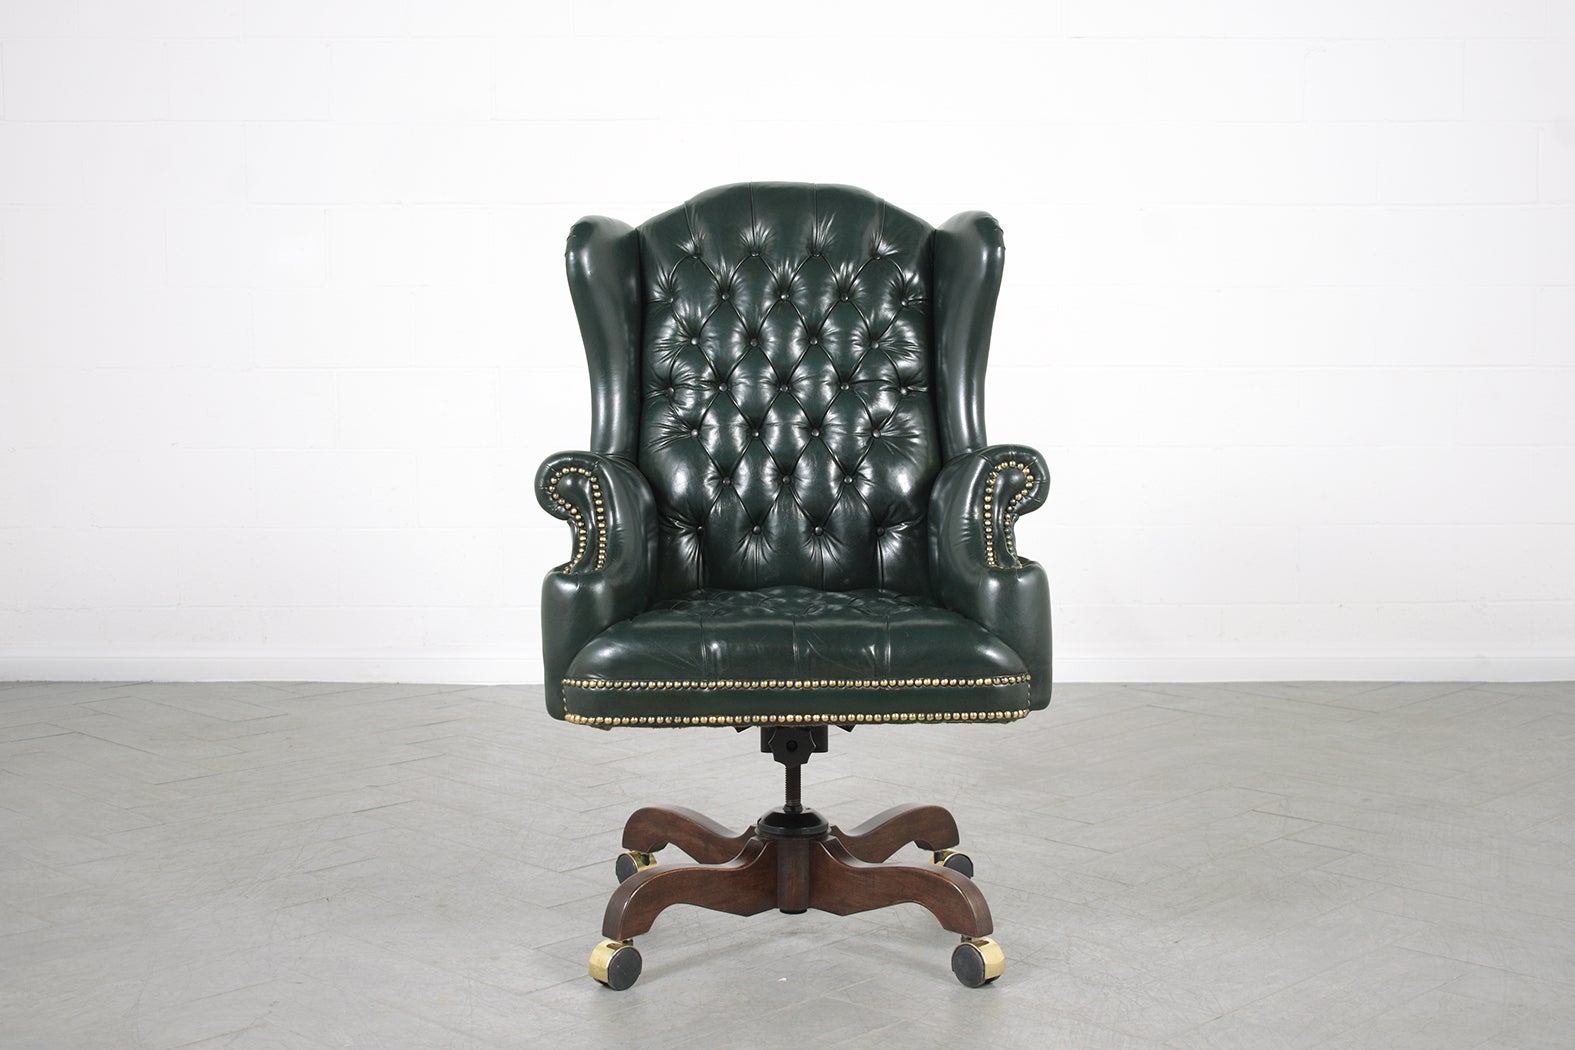 An extraordinary executive leather wingback chair is in great condition and has been completely restored by our professional craftsman team in the house this 1970s office chair is hand-crafted out of a wood and leather combination this fabulous